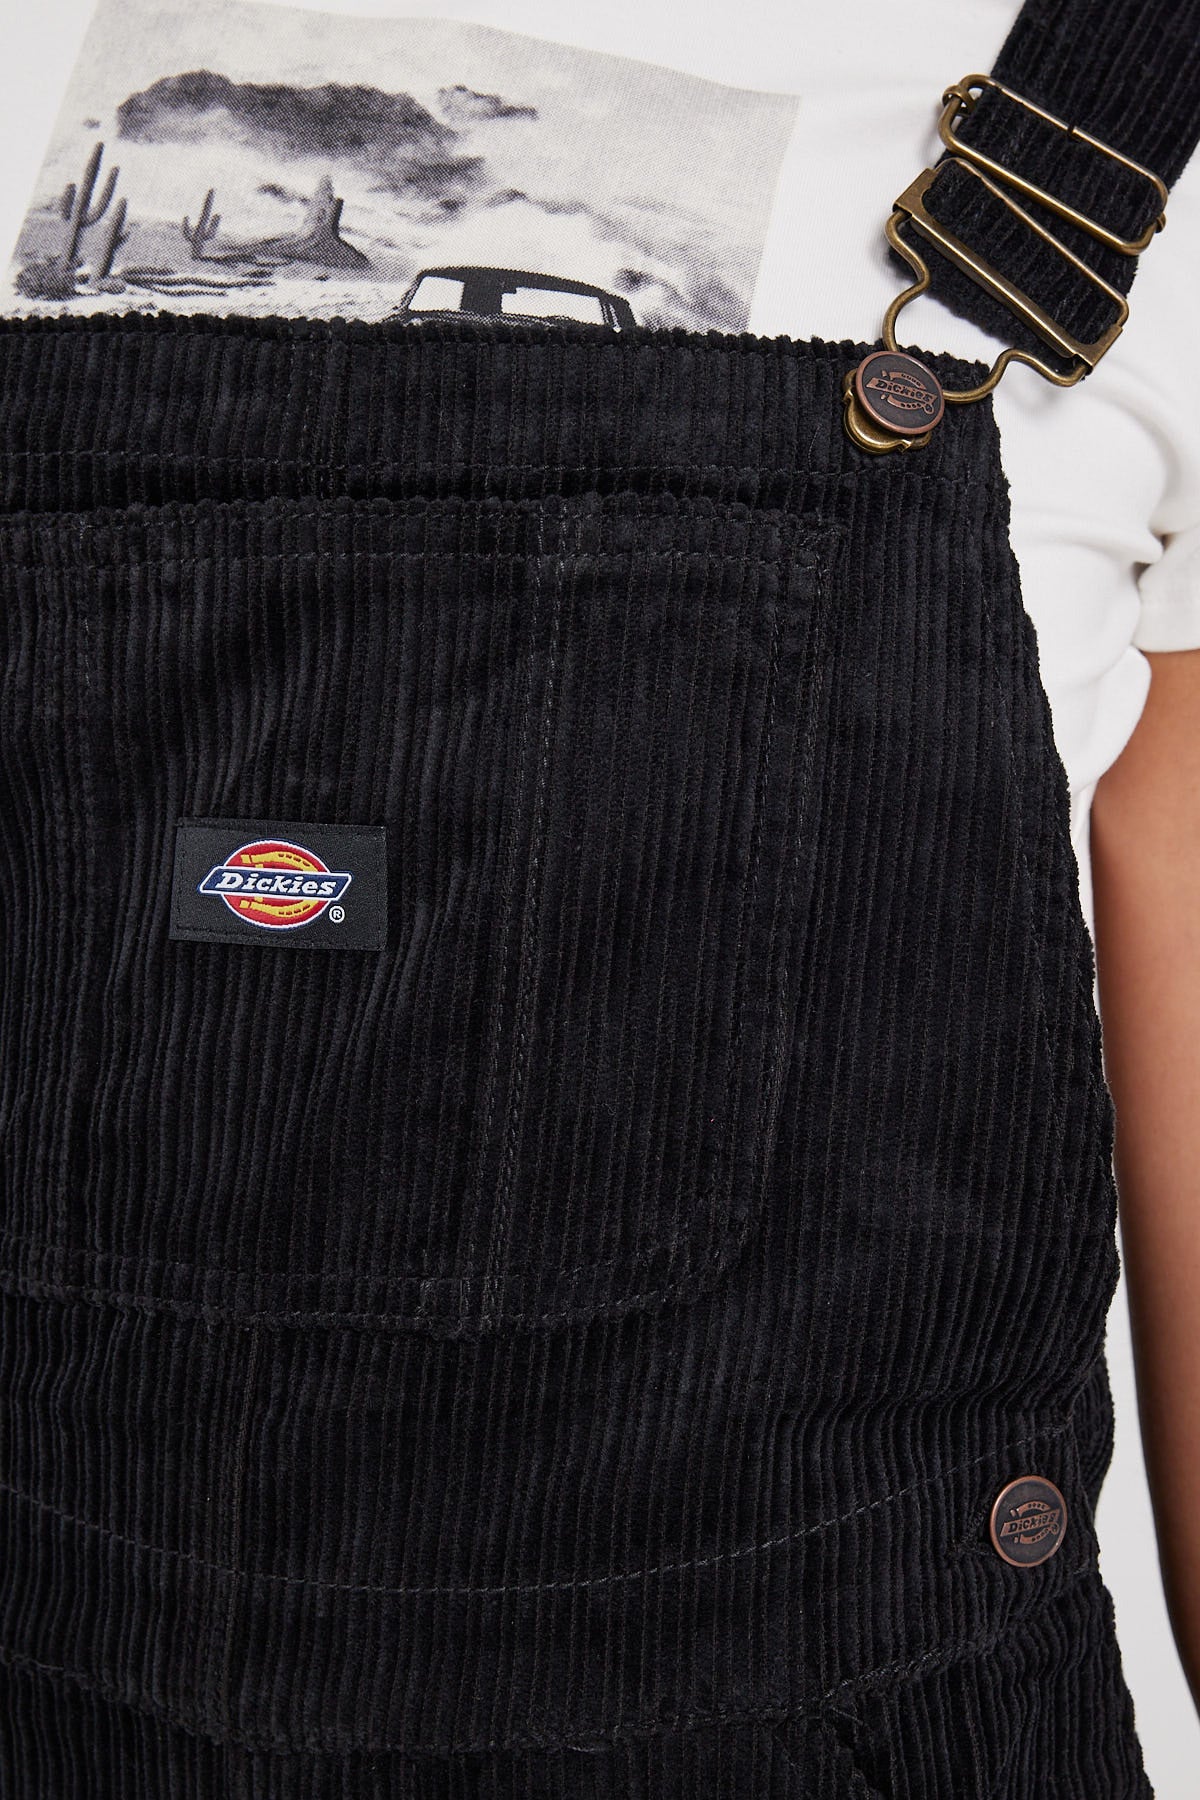 Dickies Whitney Cord Overall Black